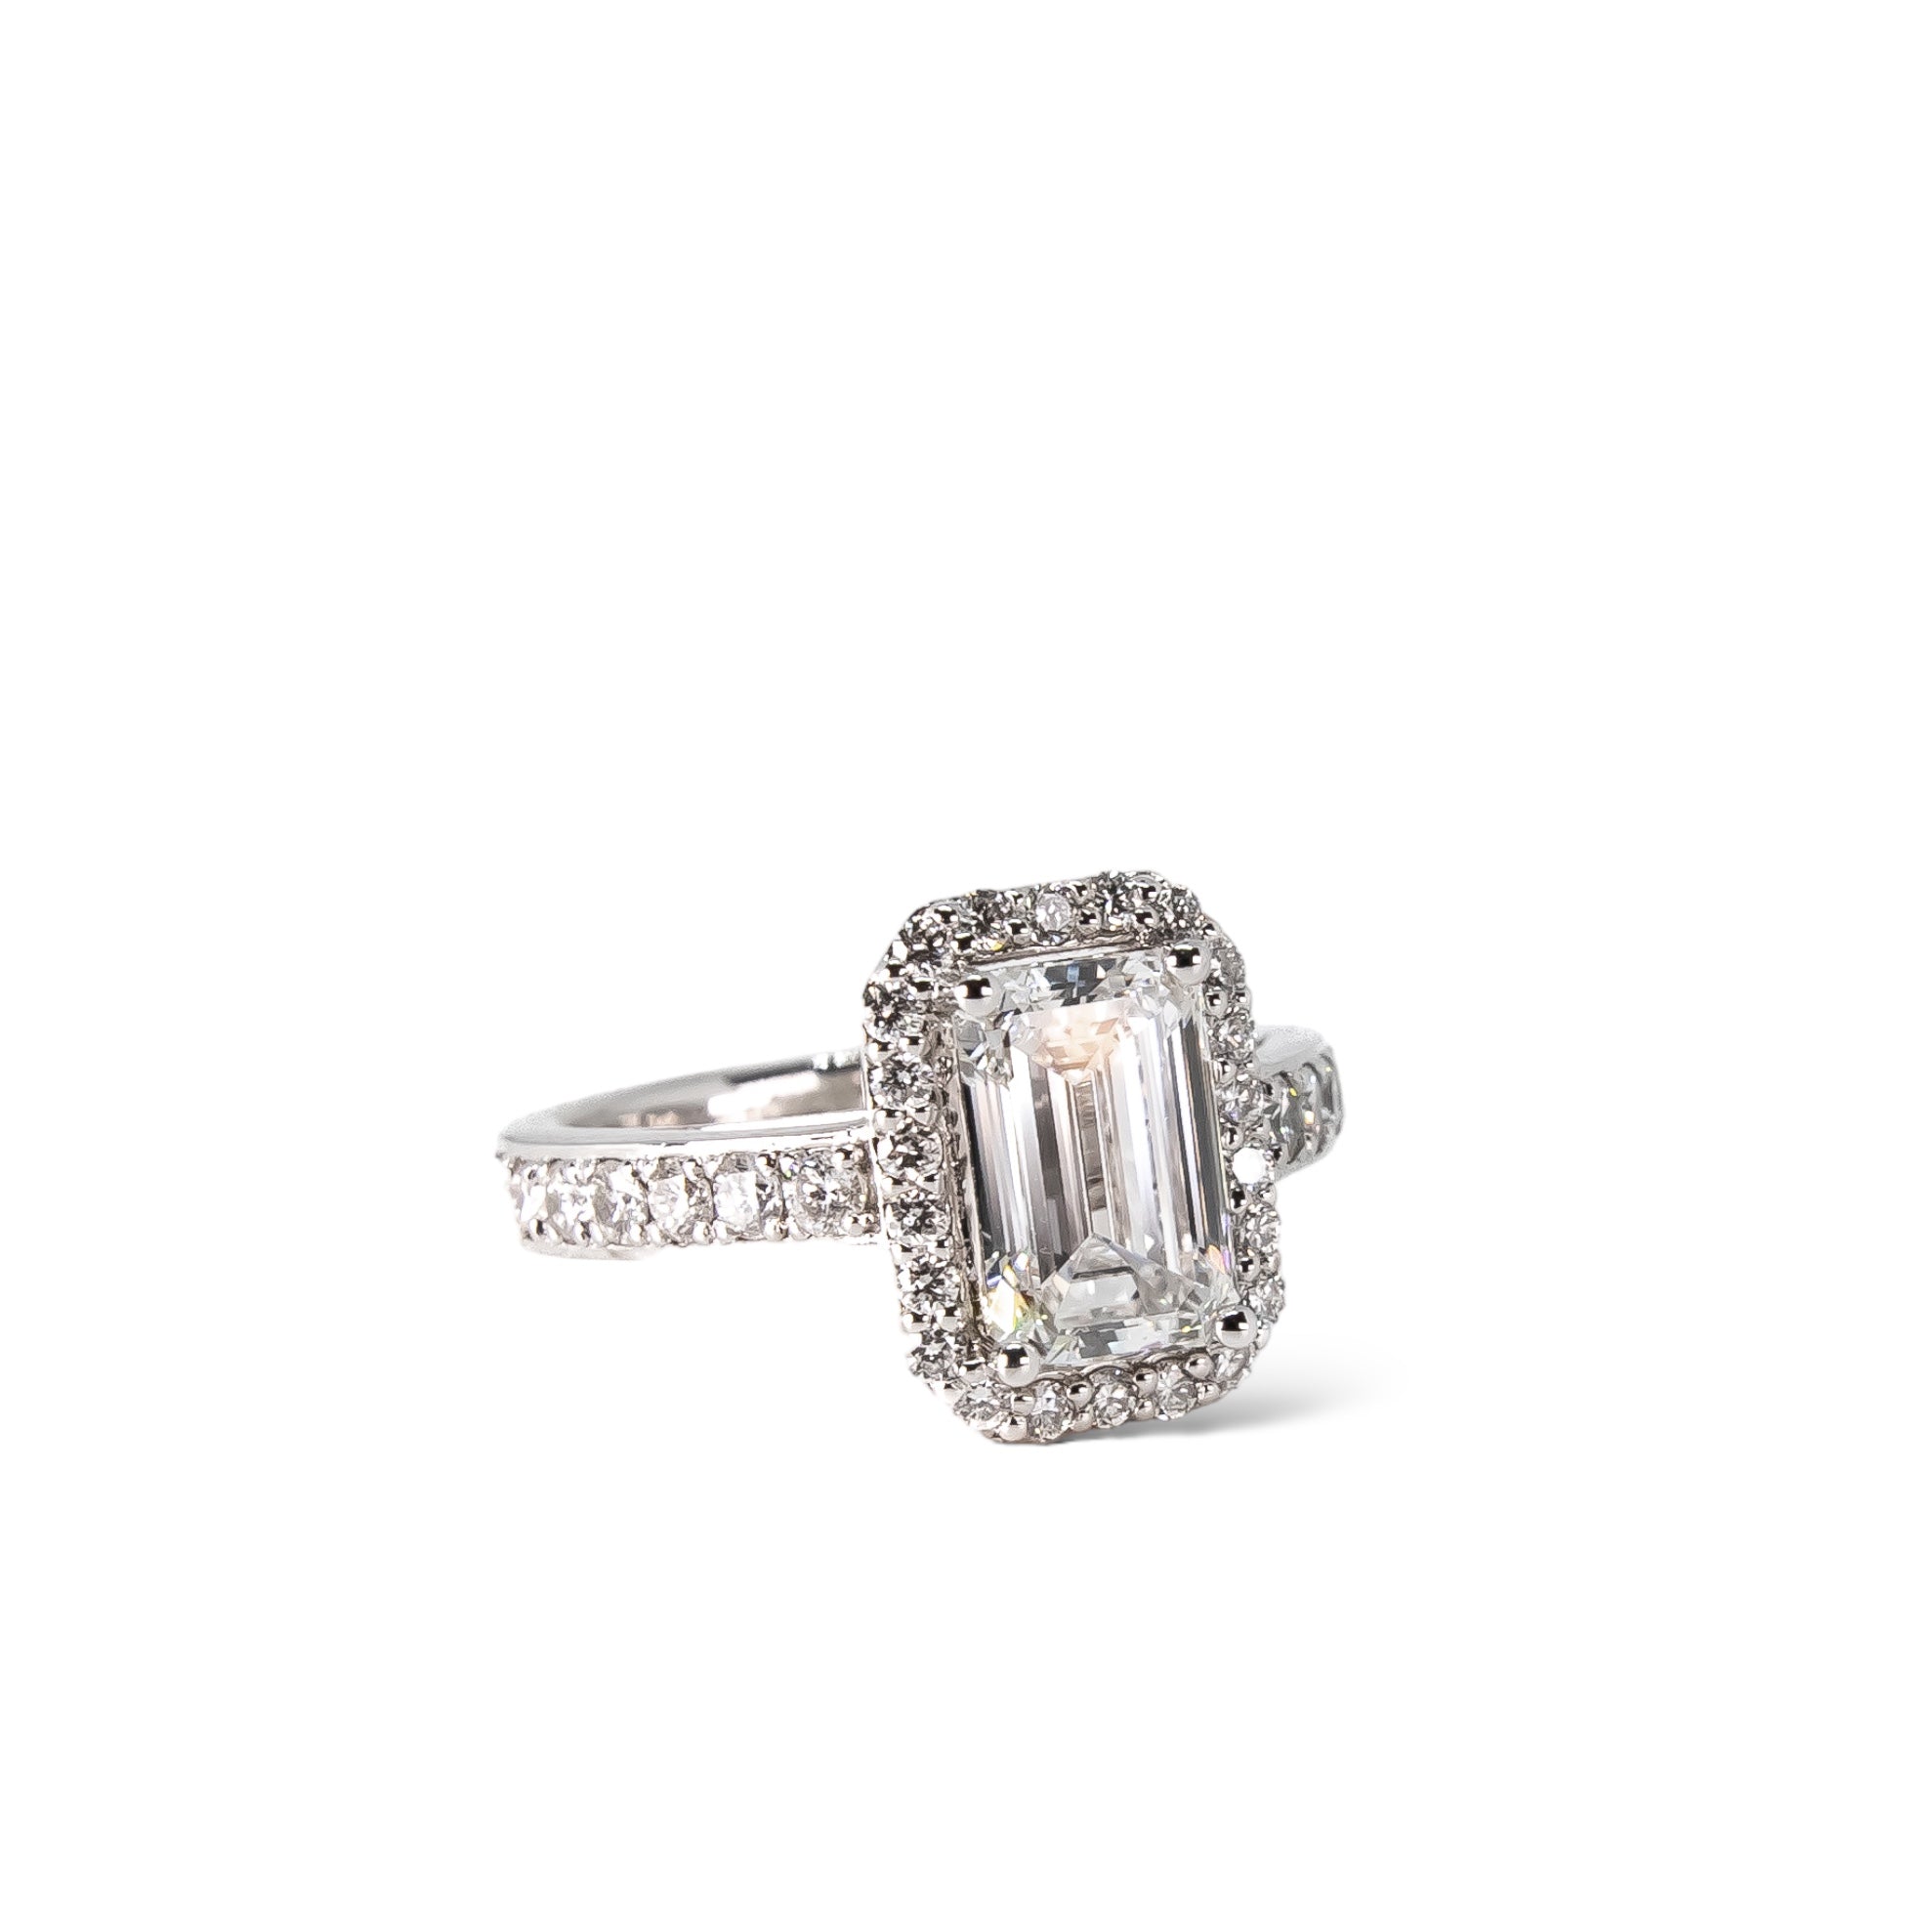 Emerald cut engagement ring with a diamond halo